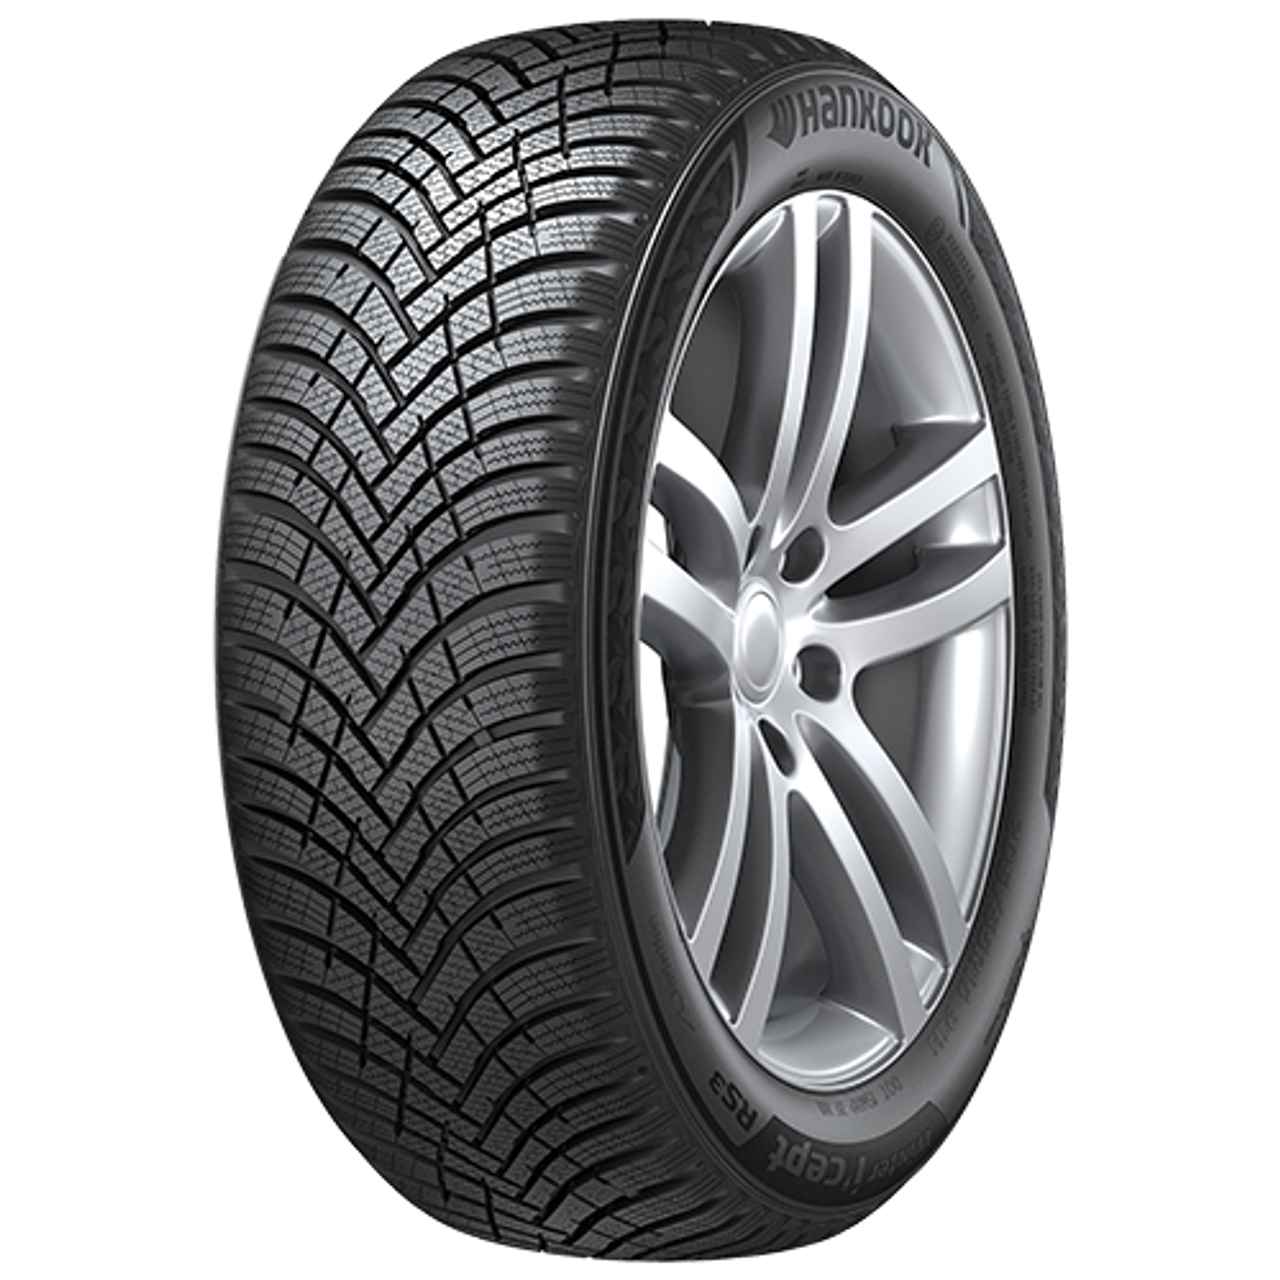 HANKOOK WINTER I*CEPT RS3 225/55R16 99H BSW